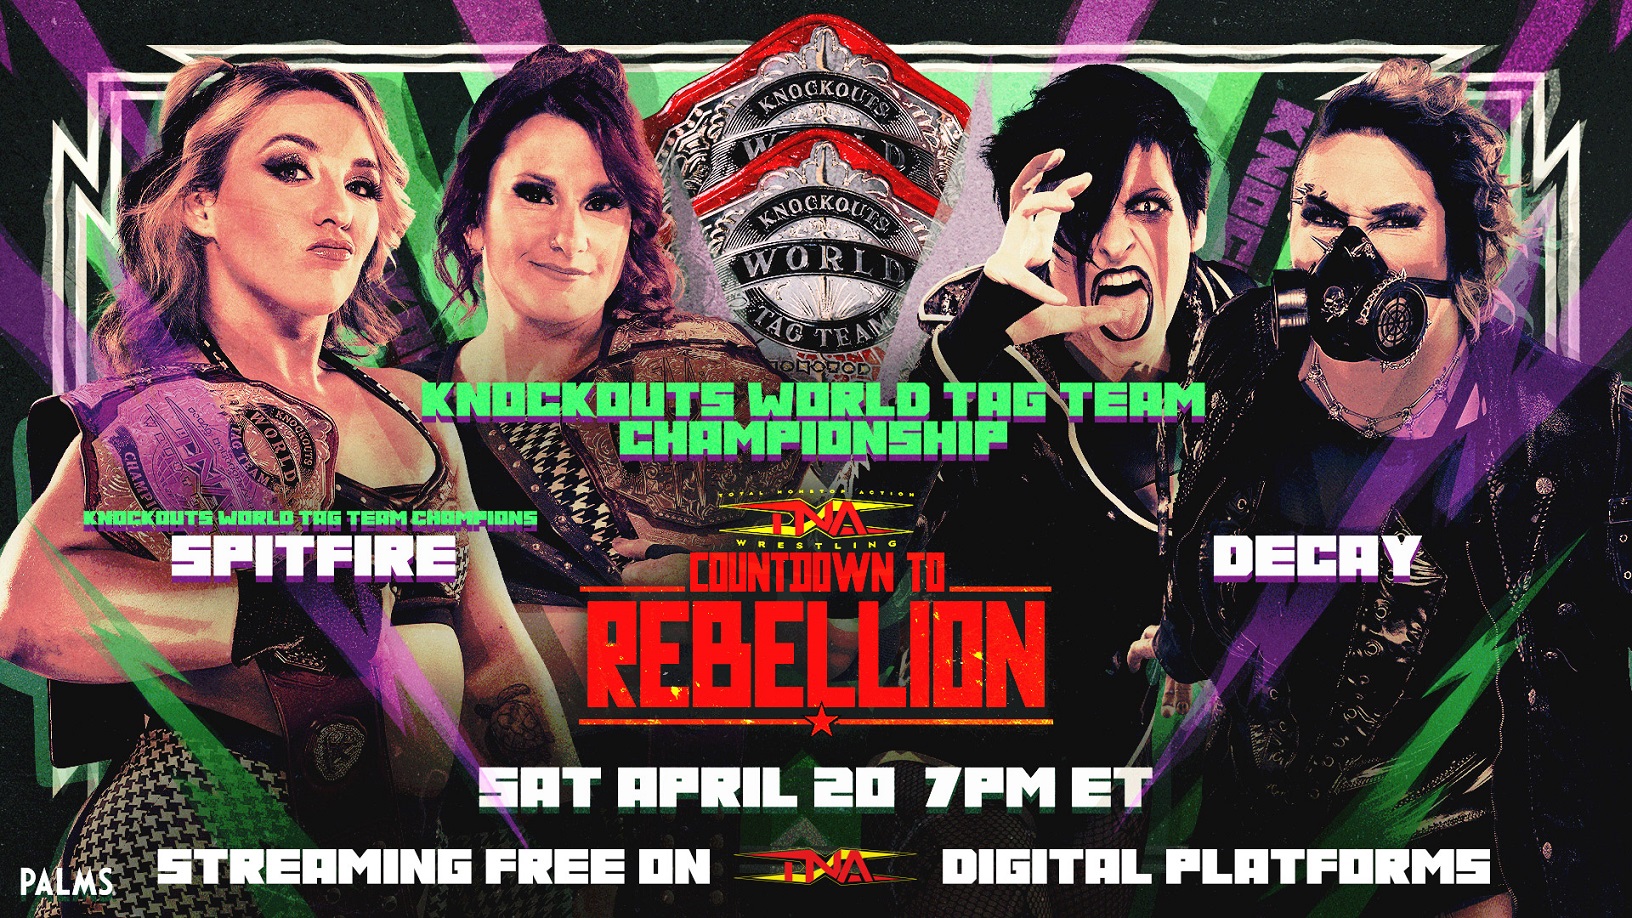 Decay Gets Their Knockouts World Tag Team Title Rematch vs. Spitfire on Countdown to Rebellion – TNA Wrestling